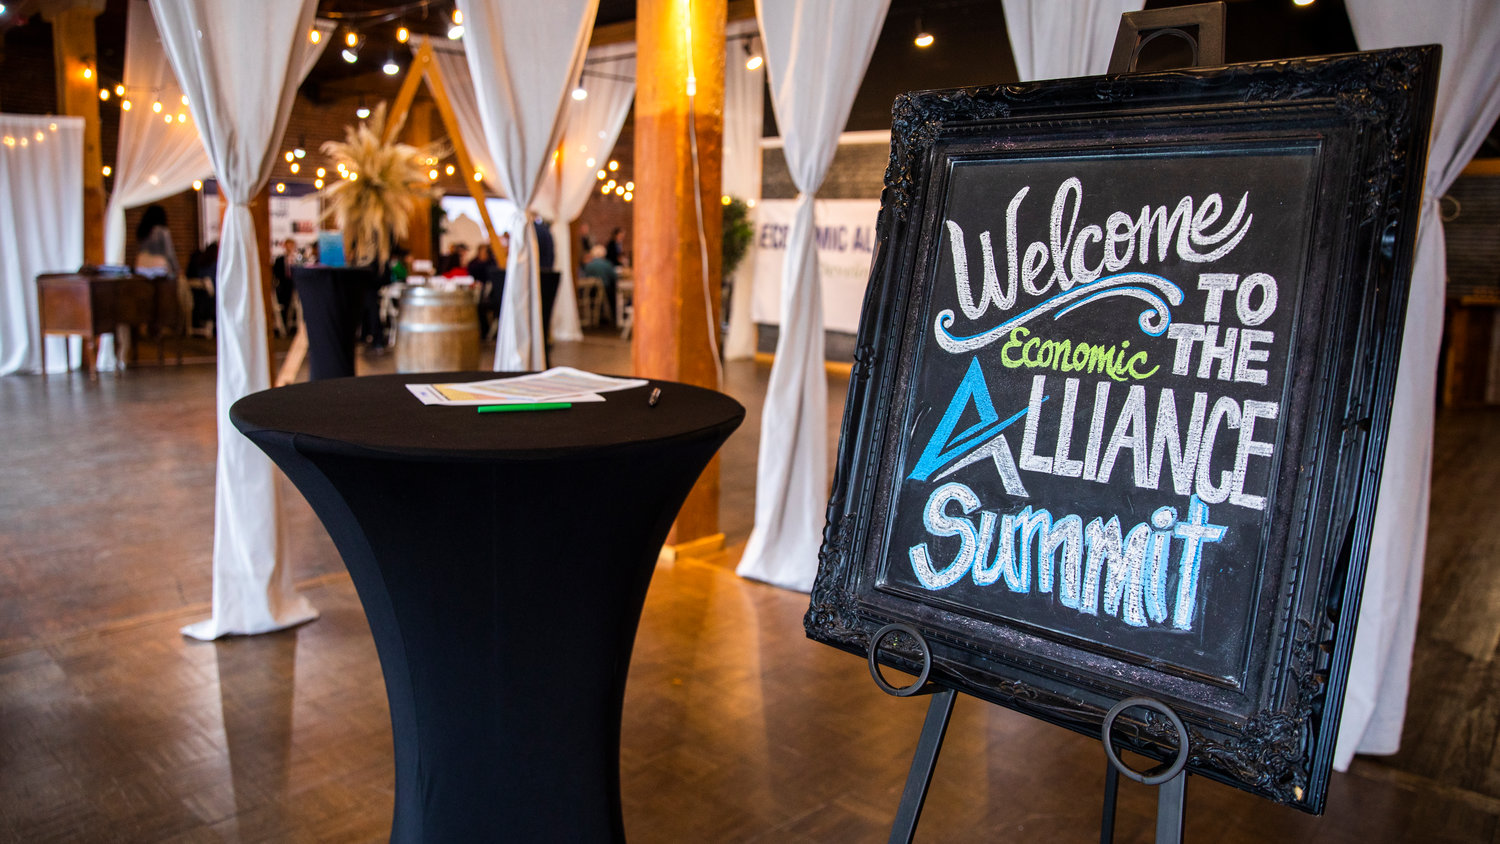 Signage sits on display inside The Loft for an Economic Alliance Summit event in Chehalis on Thursday.